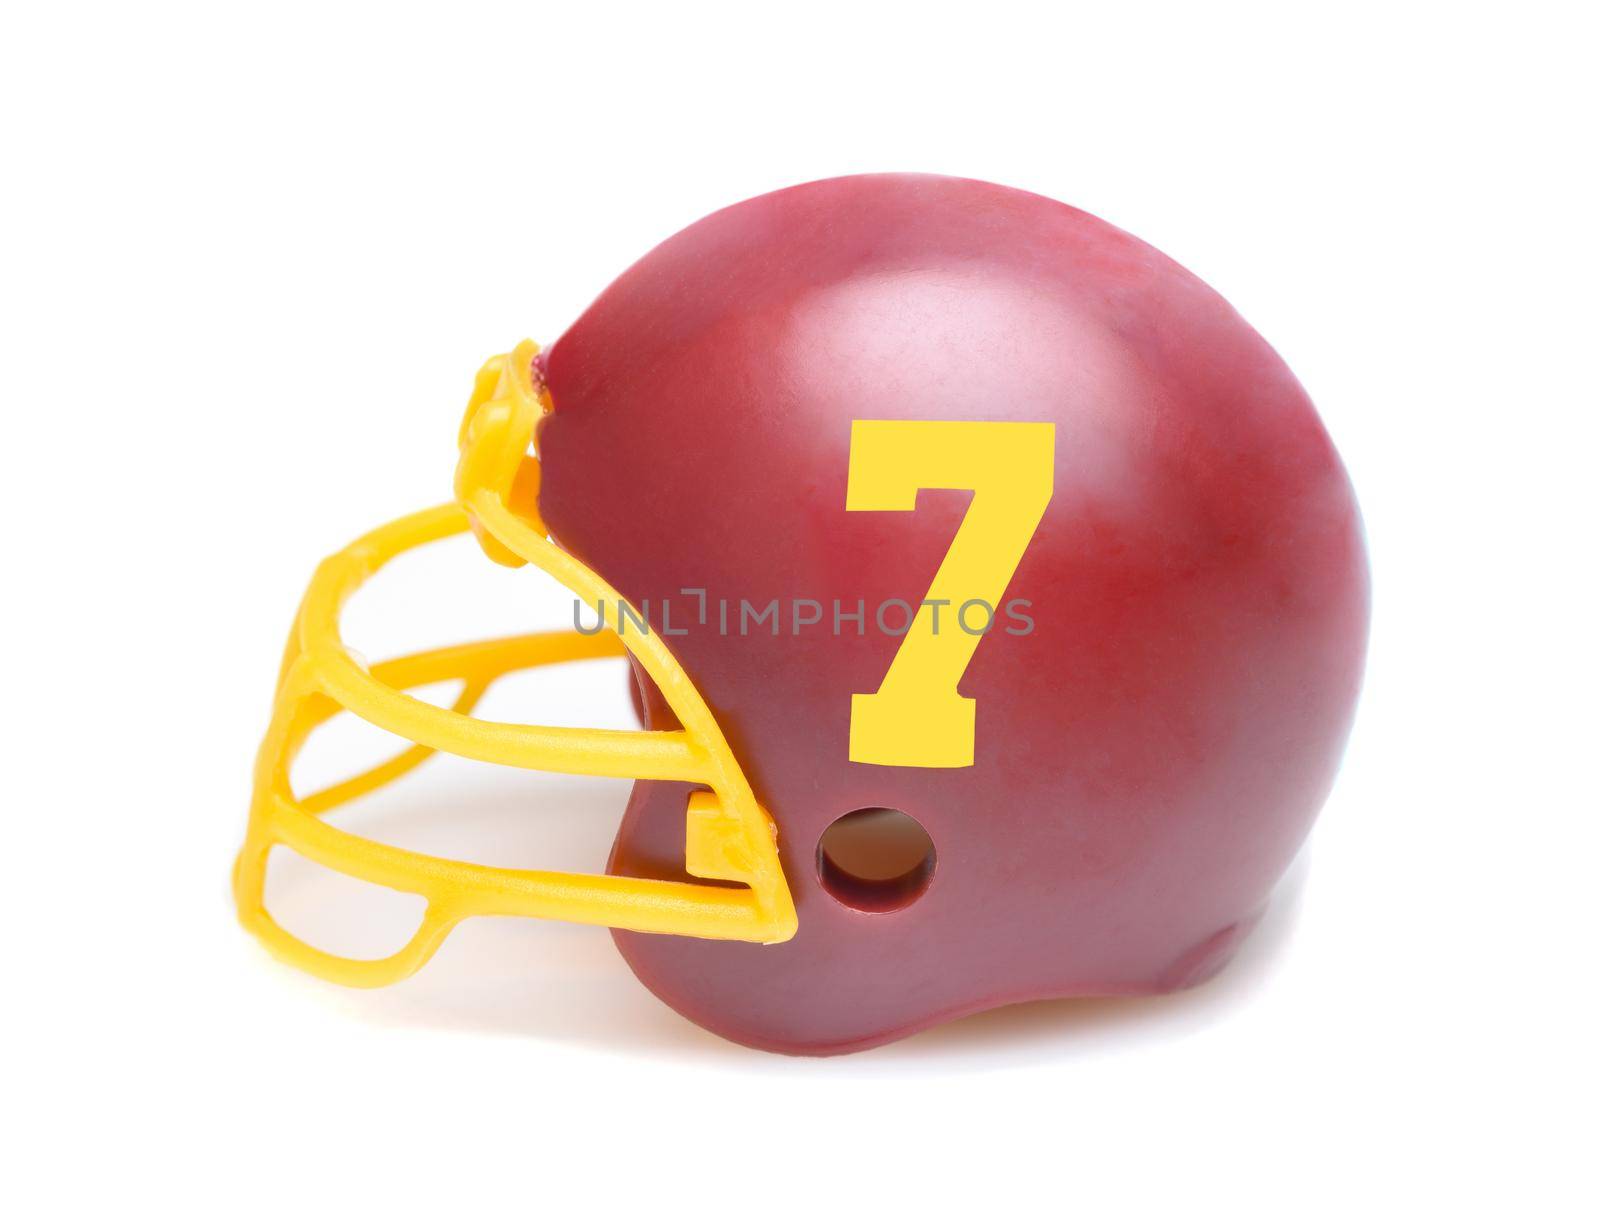 IRVINE, CALIFORNIA - 23 AUG 2020: Mini Collectable Football Helmet for the Washington Football Team of the National Football Conference East. by sCukrov